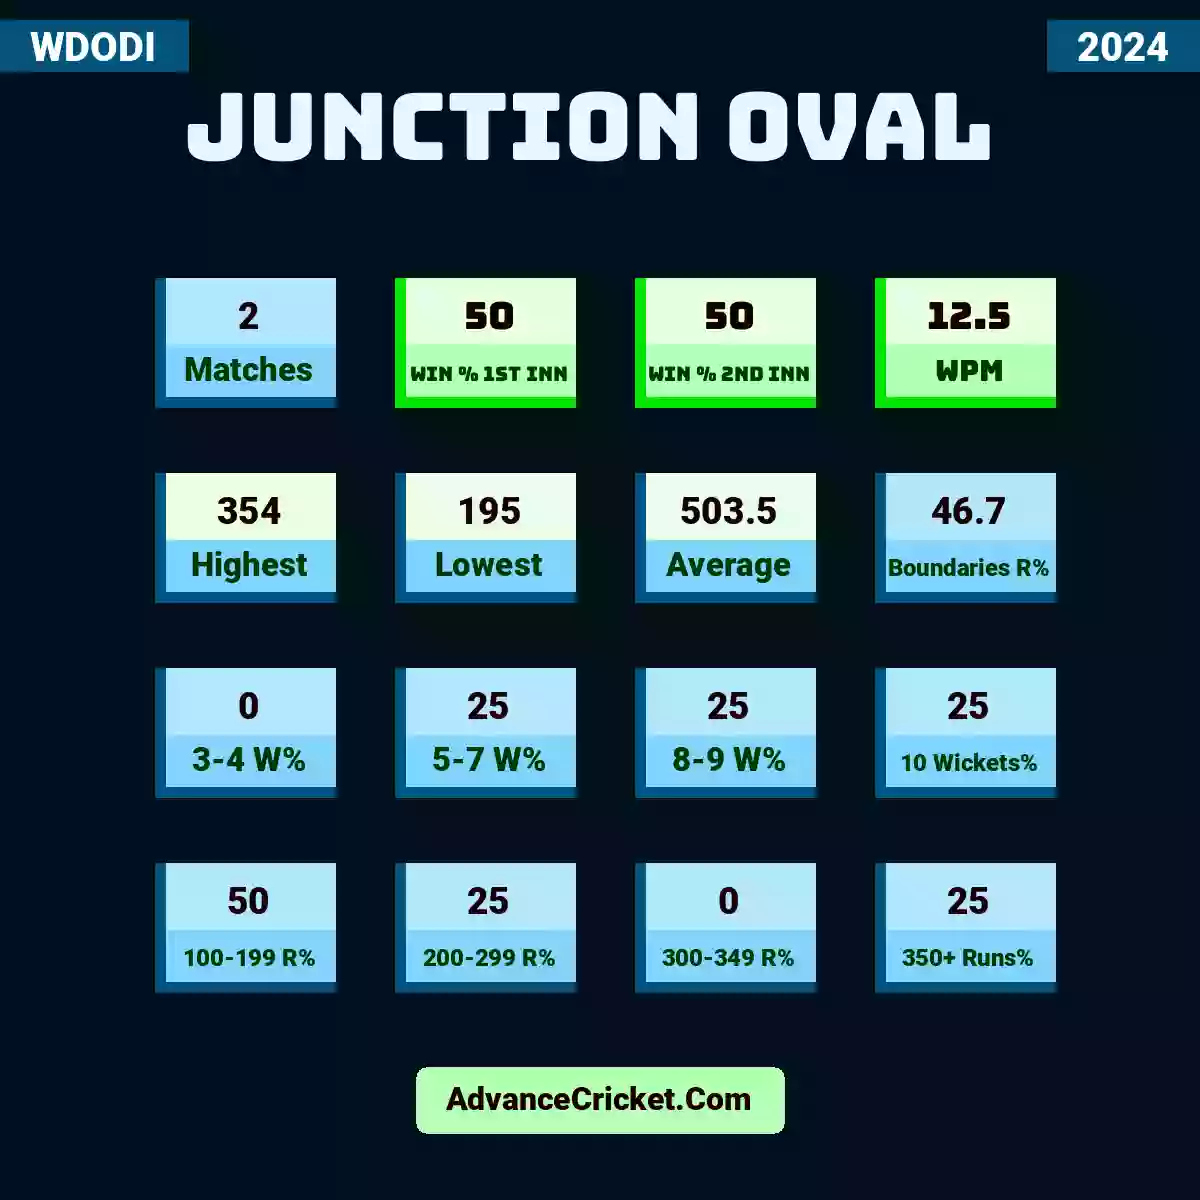 Image showing Junction Oval  with Matches: 2, Win % 1st Inn: 50, Win % 2nd Inn: 50, WPM: 12.5, Highest: 354, Lowest: 195, Average: 503.5, Boundaries R%: 46.7, 3-4 W%: 0, 5-7 W%: 25, 8-9 W%: 25, 10 Wickets%: 25, 100-199 R%: 50, 200-299 R%: 25, 300-349 R%: 0, 350+ Runs%: 25.